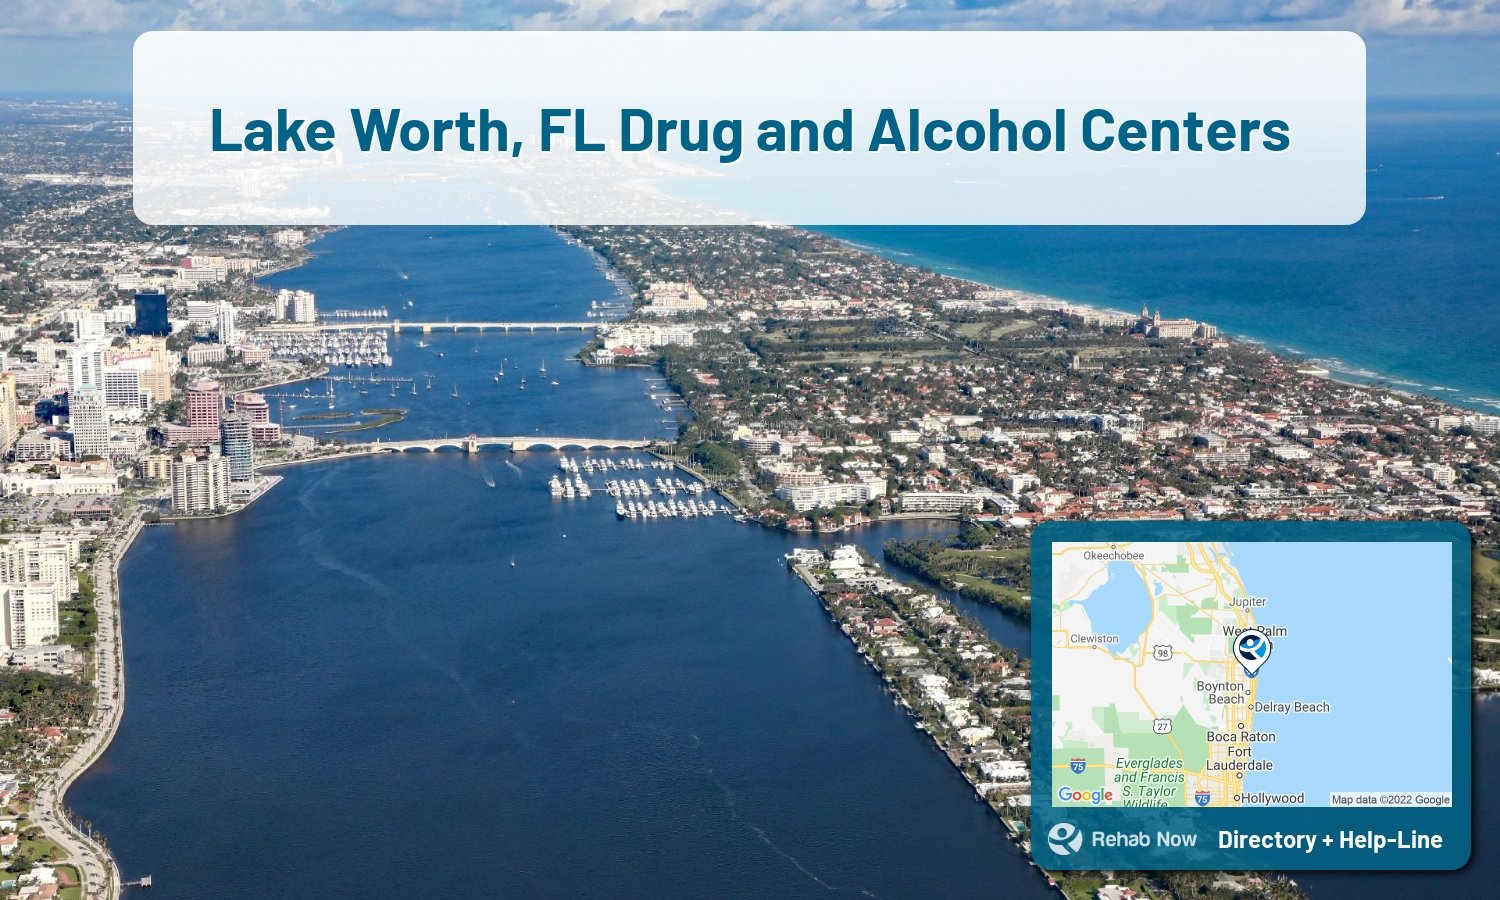 Lake Worth, FL Treatment Centers. Find drug rehab in Lake Worth, Florida, or detox and treatment programs. Get the right help now!